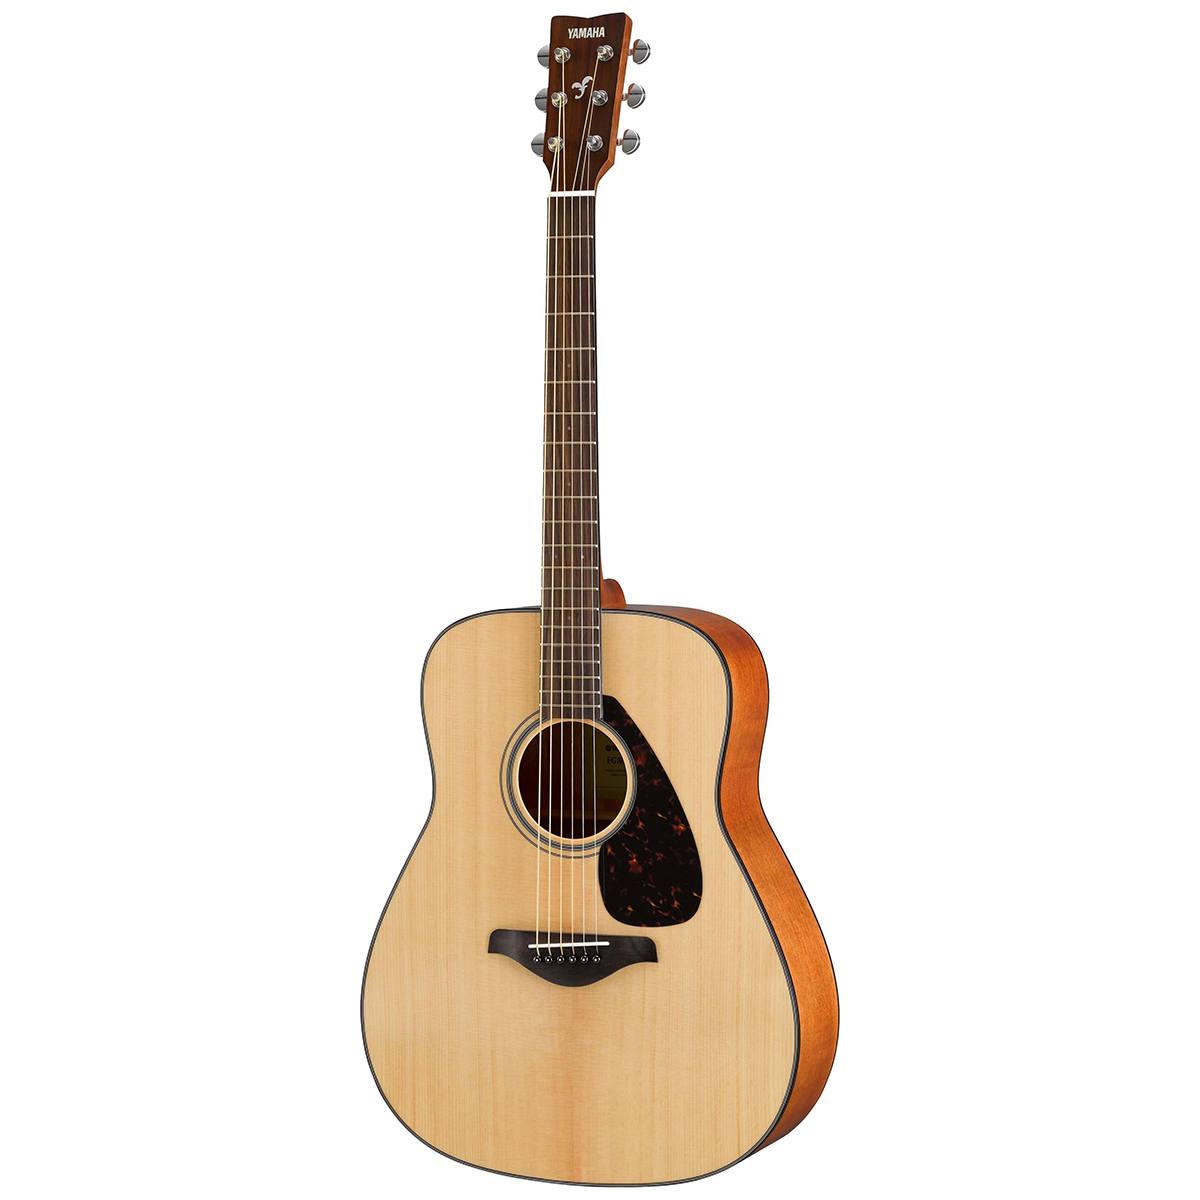 Yamaha FG Series FG800 Acoustic Guitar Dreadnought Top Solid Spruce Back Nato, Okoume - image 3 of 4